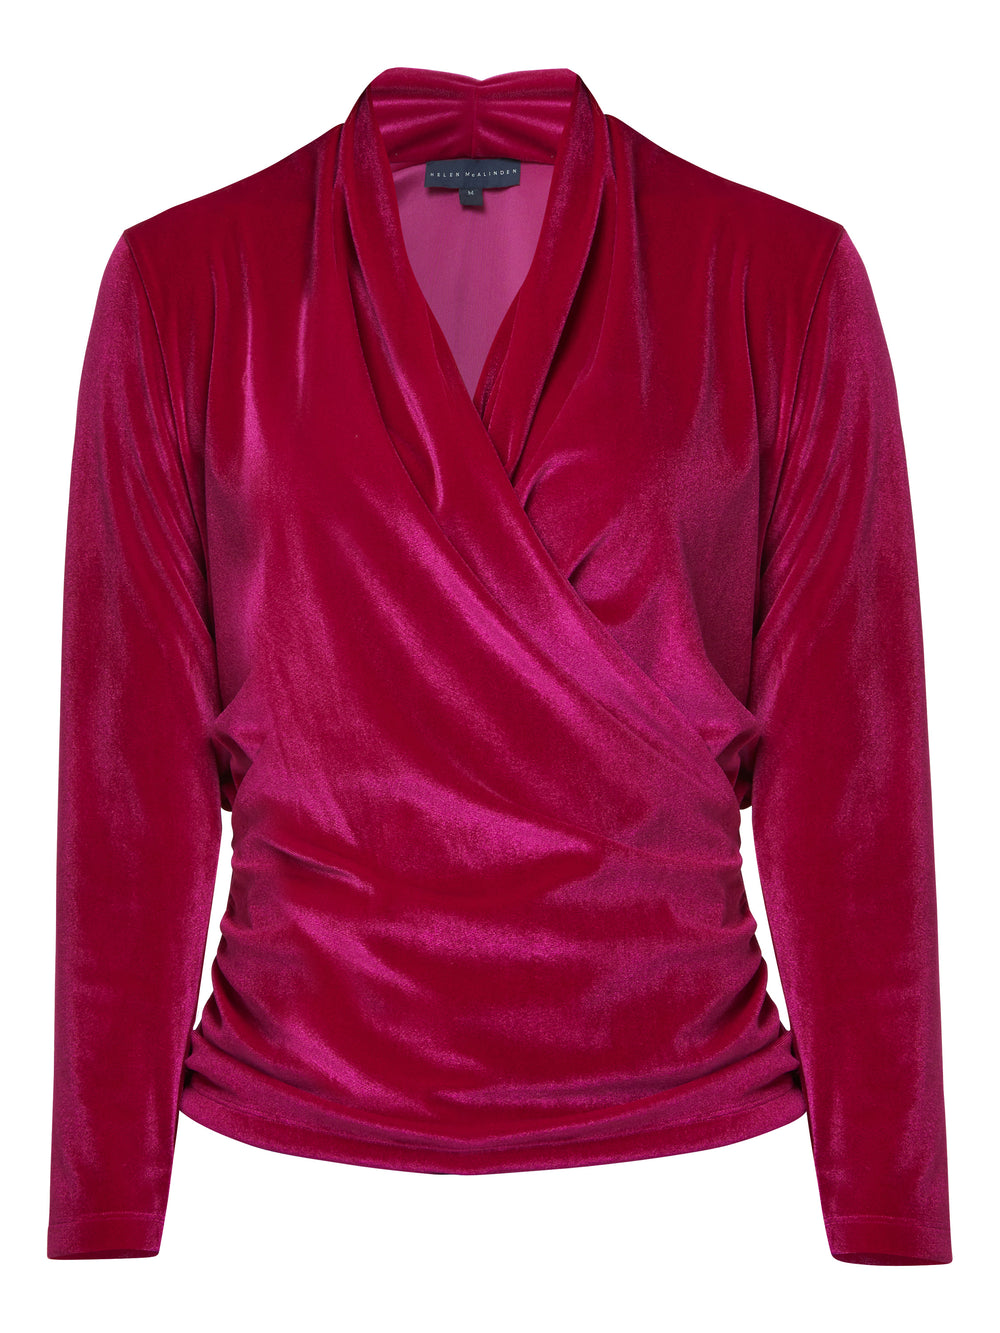 Introducing the Roxanne Fuchsia Velvet Top, an updated version of the beloved best-selling faux-wrap top. This captivating top boasts a sleek silhouette and a beautifully draped v-neckline, adding an elegant touch to your ensemble. Crafted from luxurious fuchsia stretch velvet, it radiates opulence and allure. With its hip-length cut and full-length sleeves, this top effortlessly combines comfort and style.